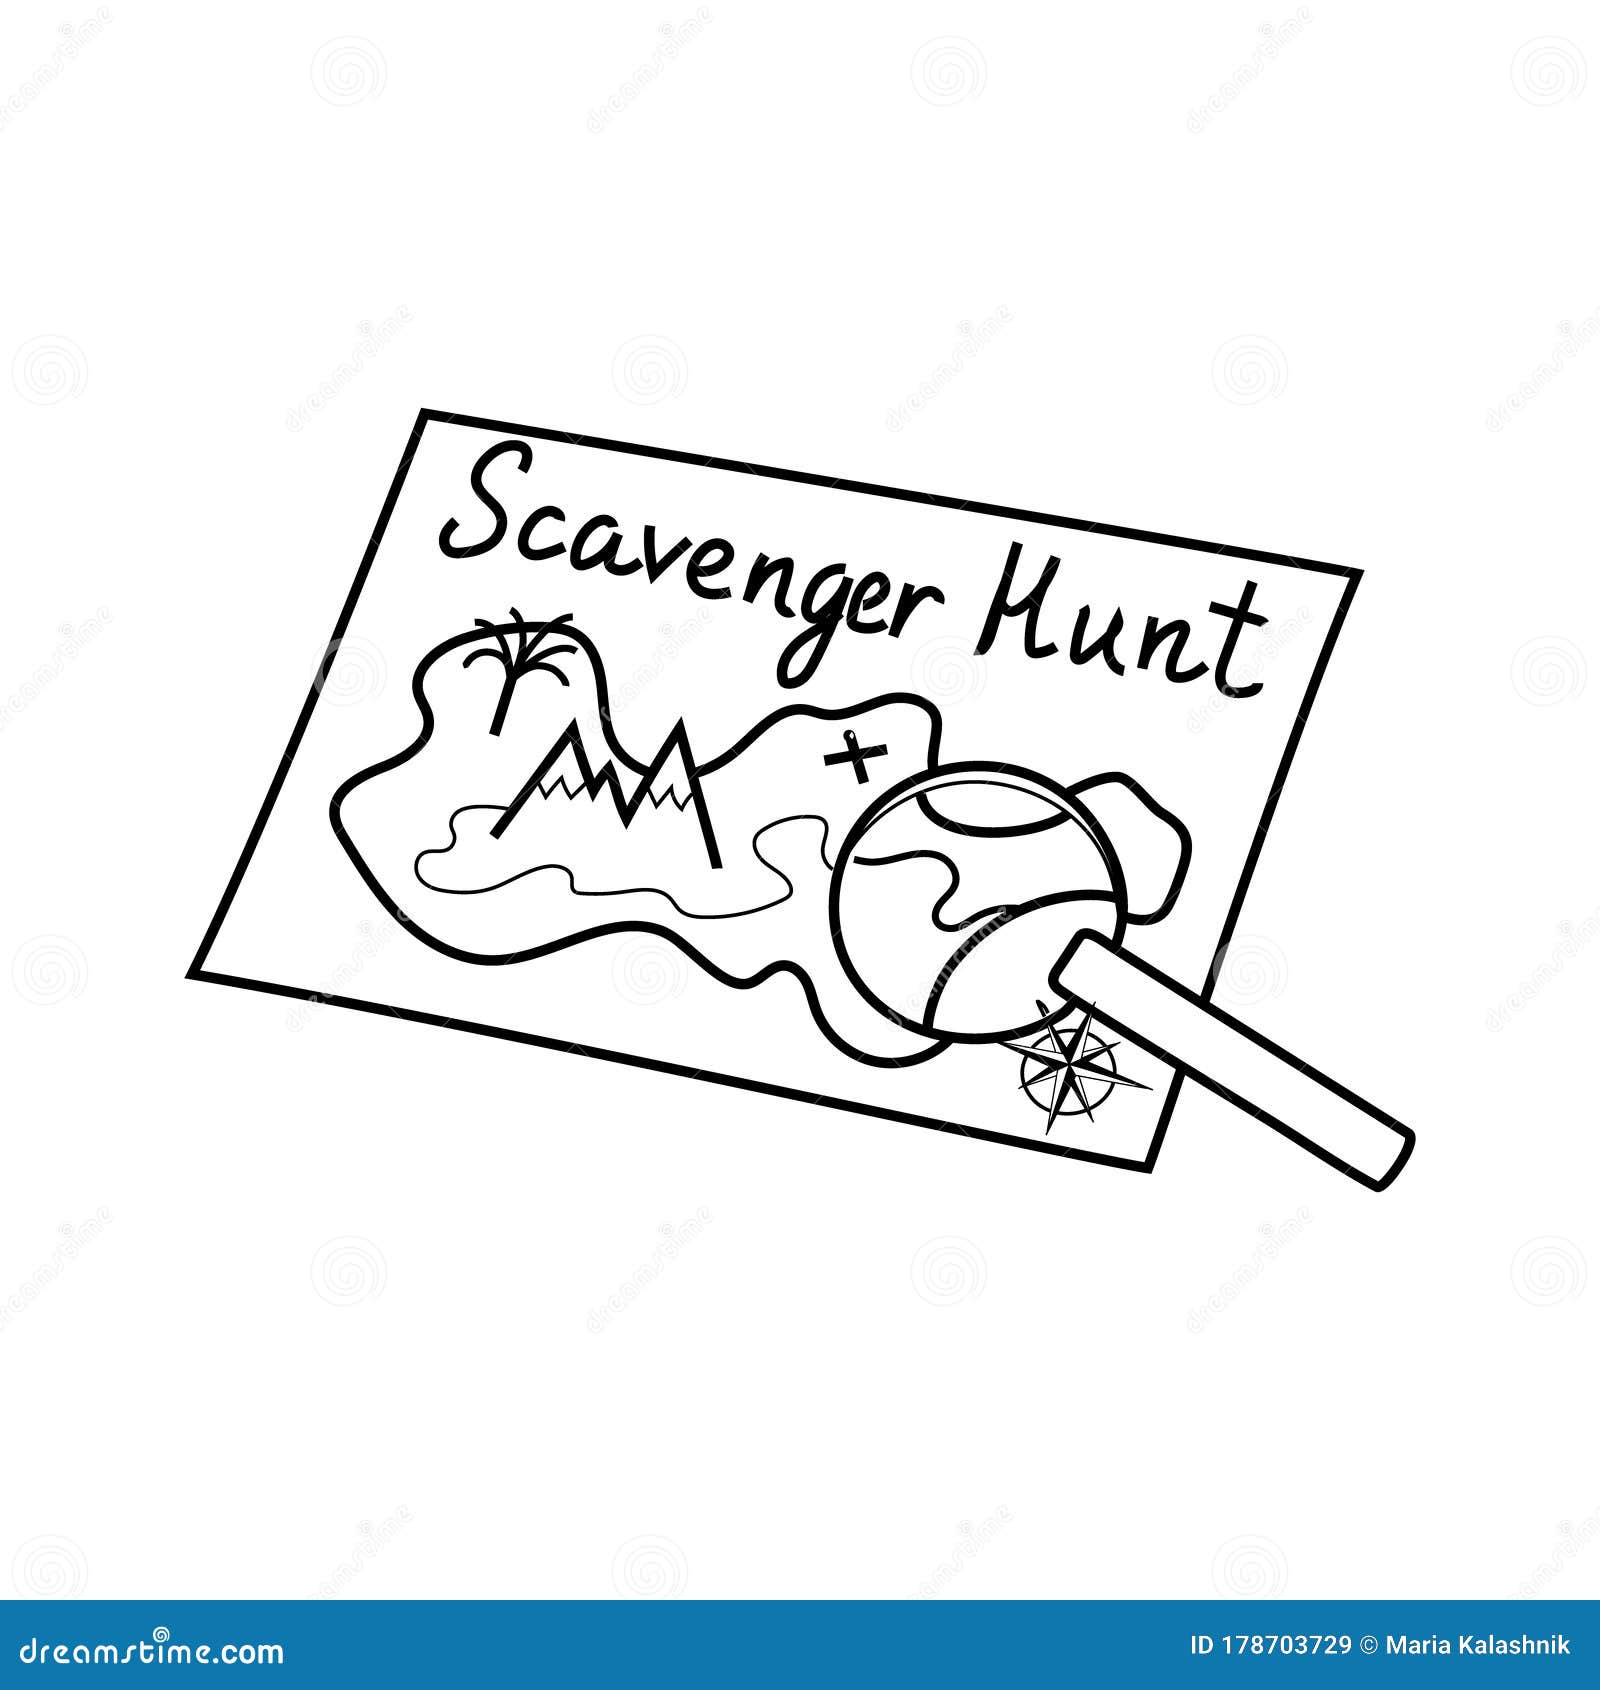 scavenger hunt icon, geocaching silhouette hand drawn . ink pen sketch style